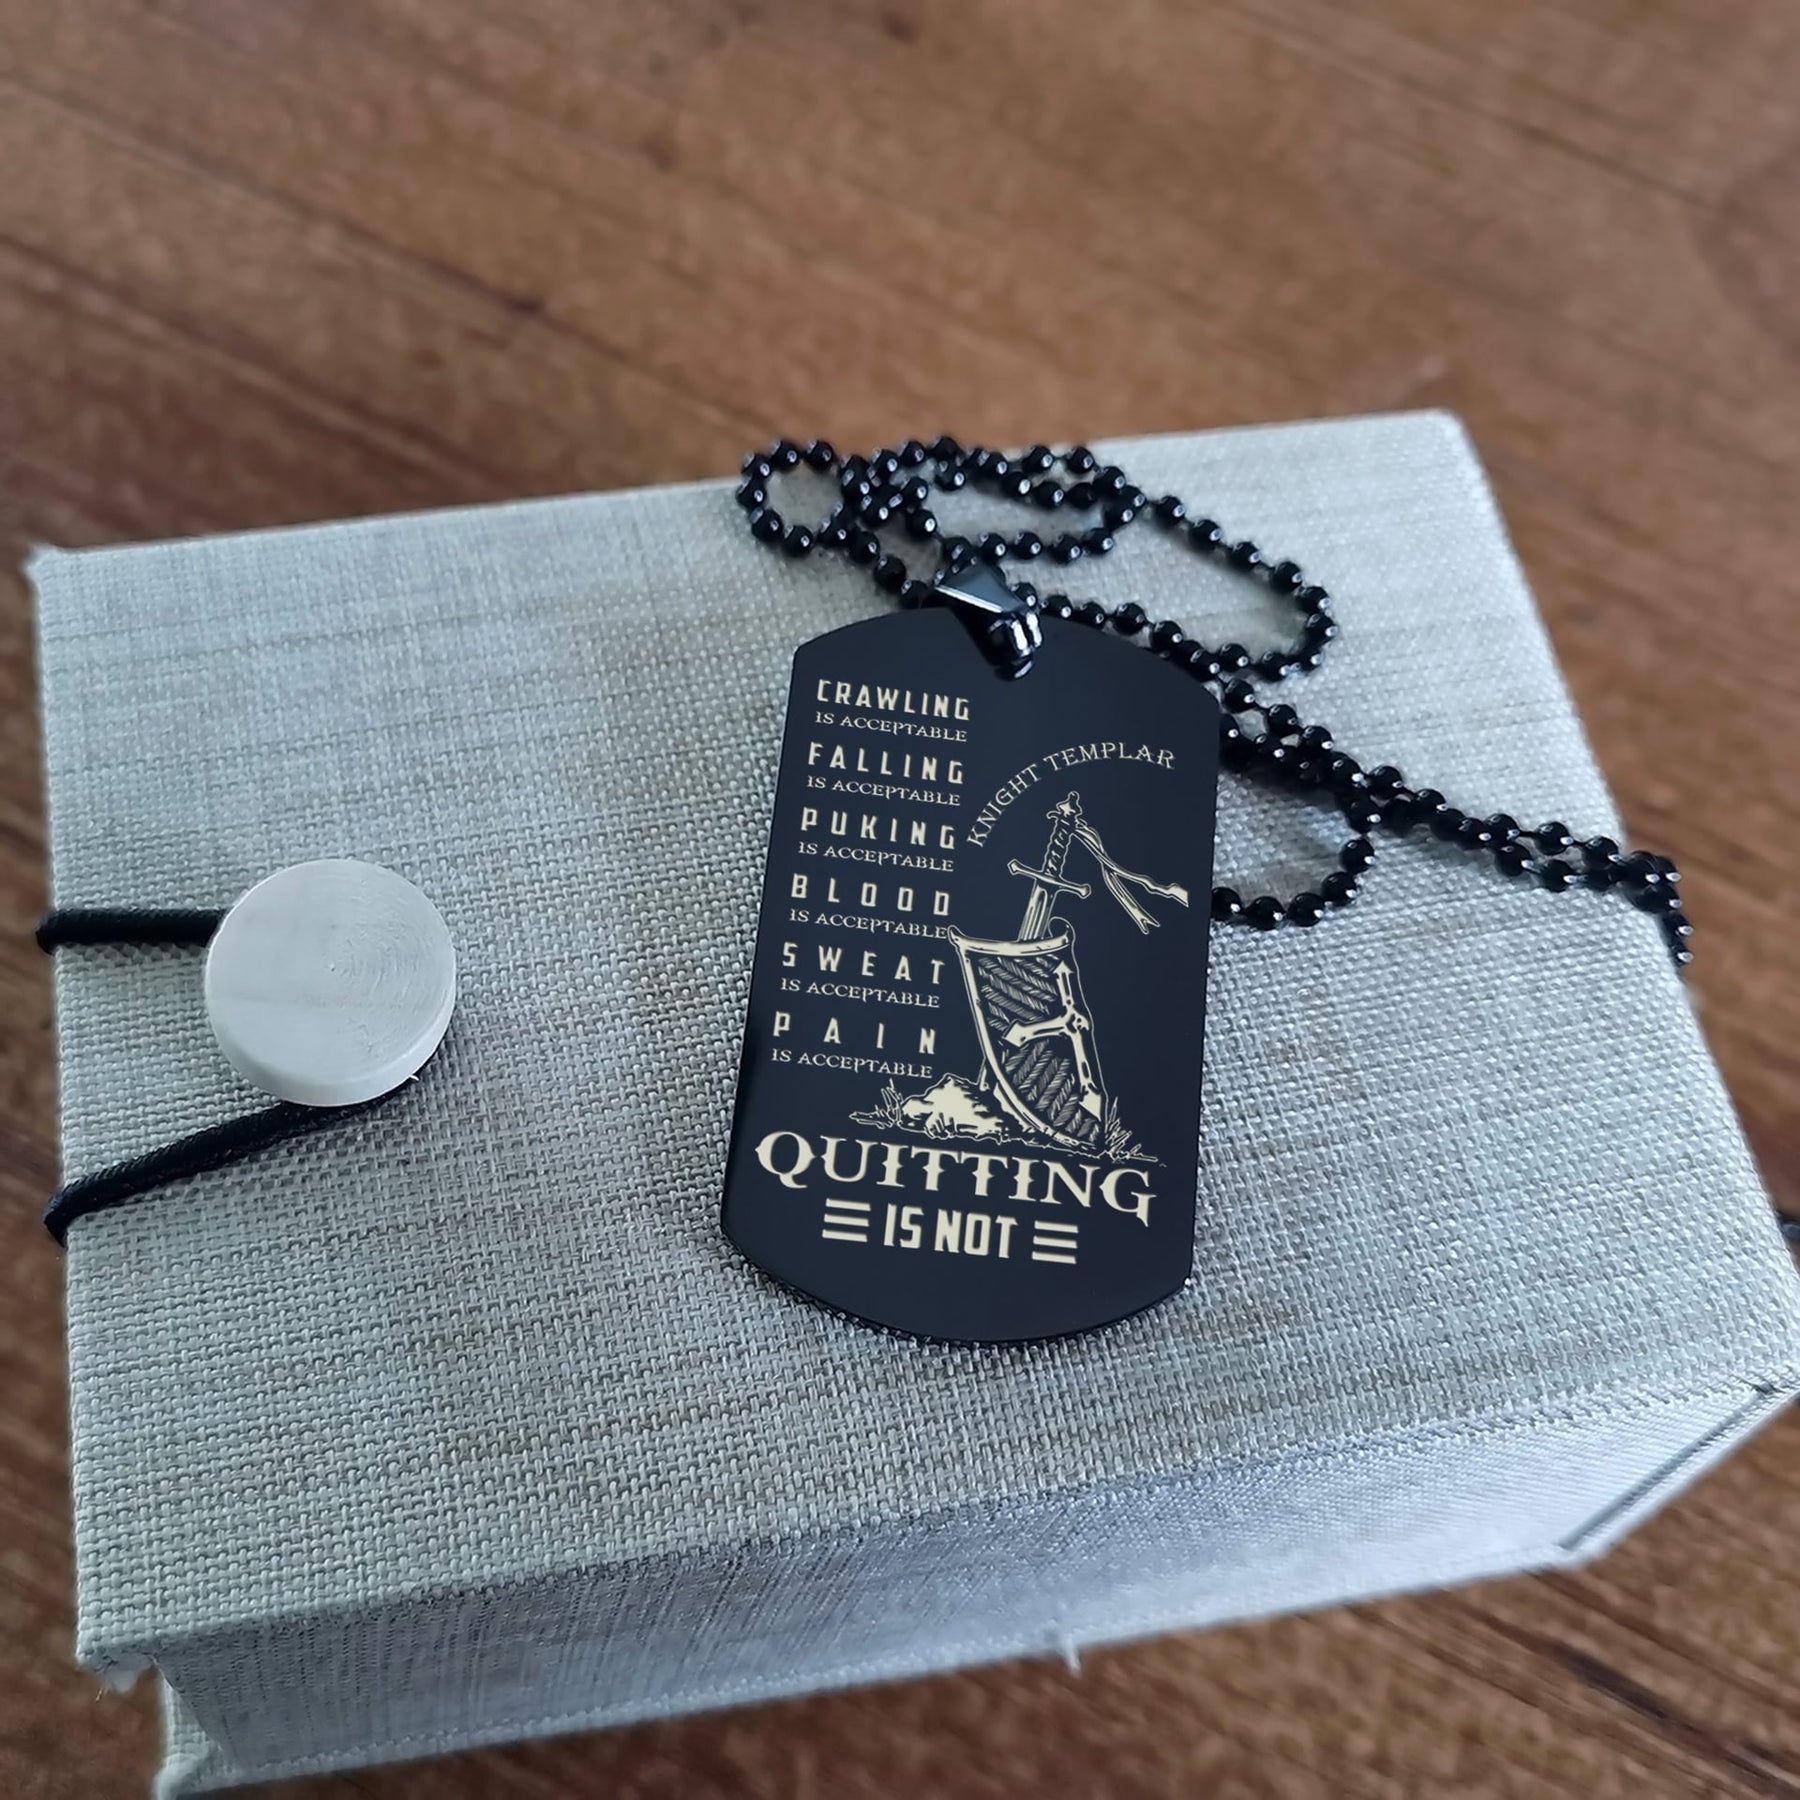 KTD018 - Quitting Is Not - Knight Templar  - Engrave Black Dogtag